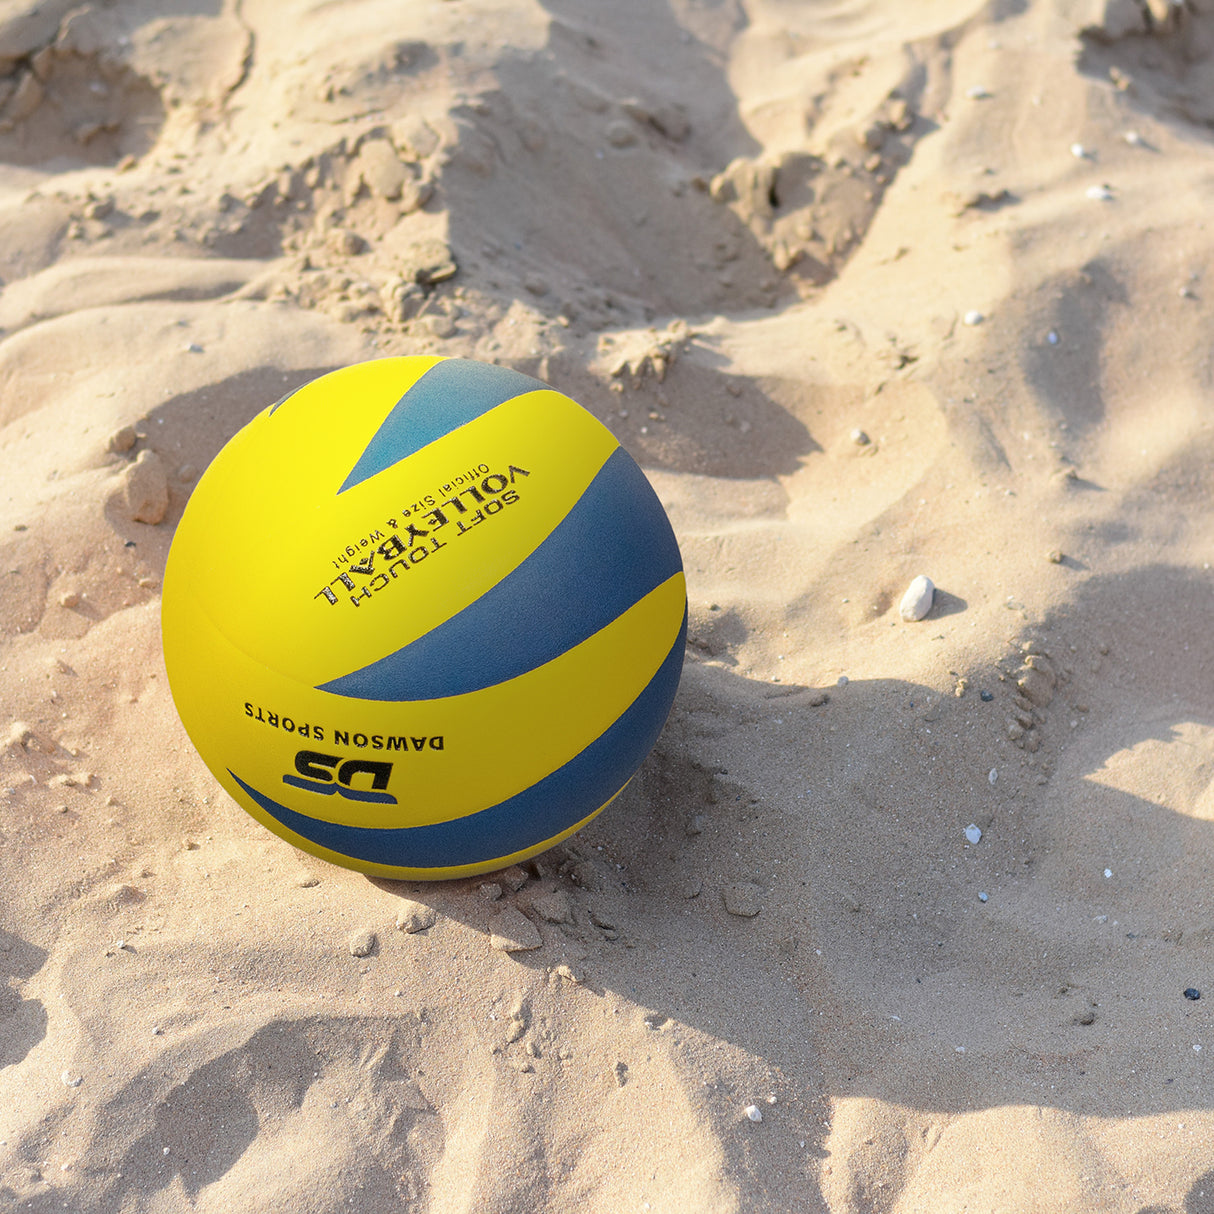 DS Soft Touch TPE Foam Volleyball - Size 5